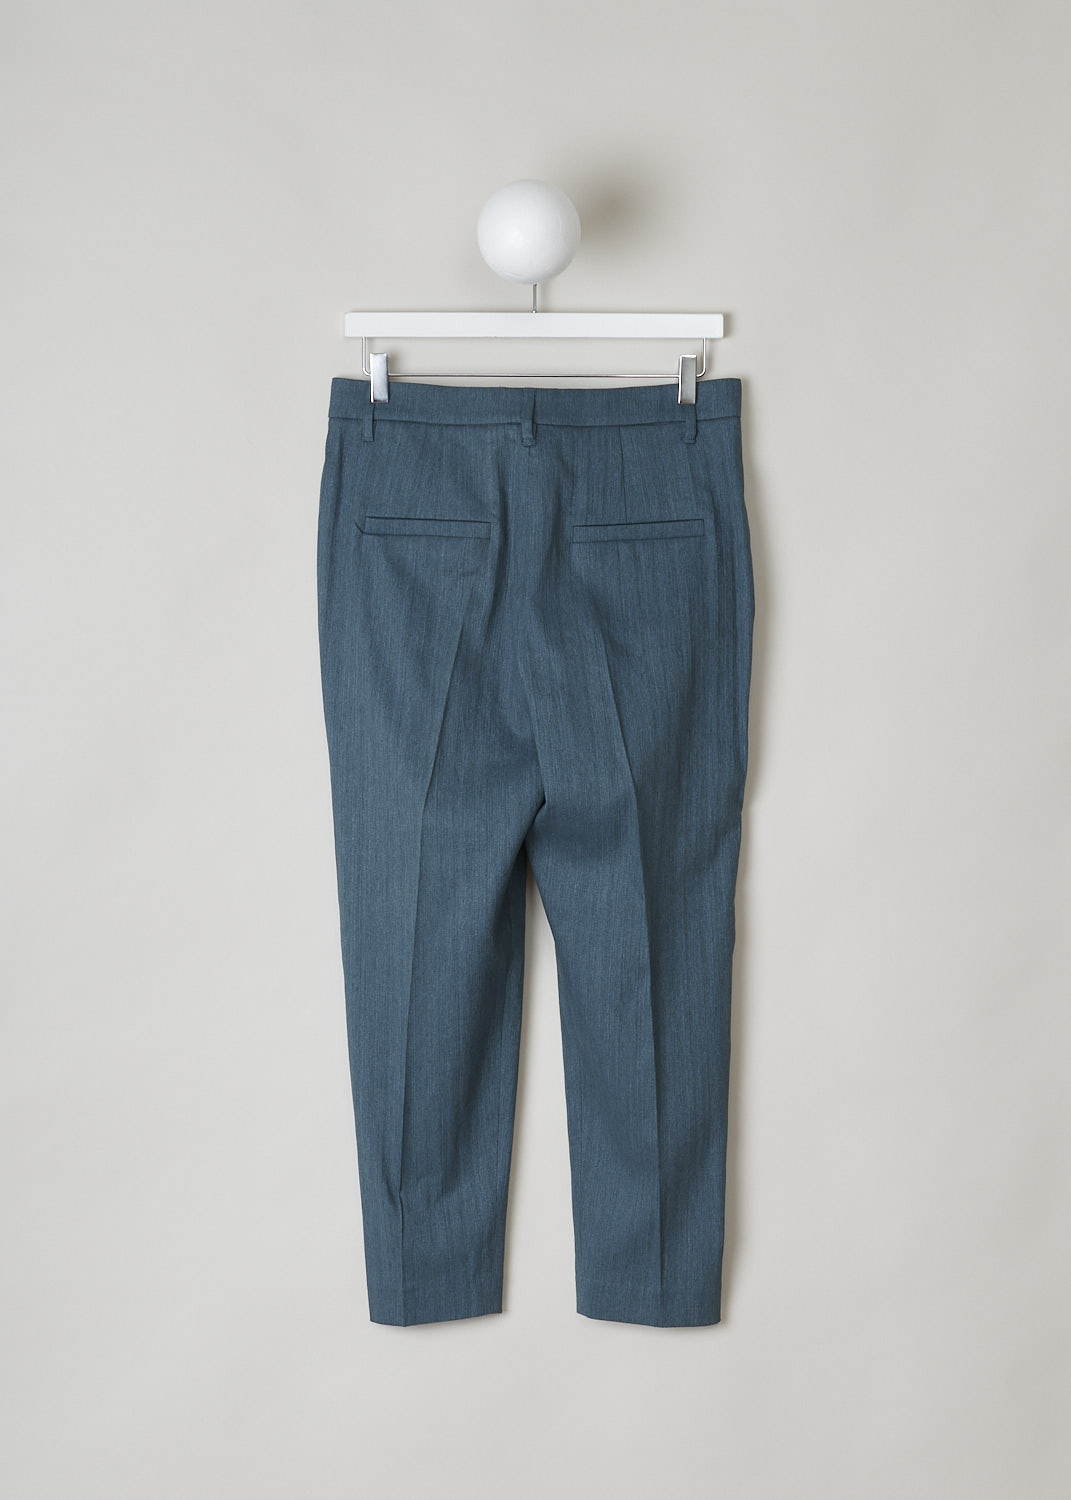 BRUNELLO CUCINELLI, TEAL GREEN LINEN BLEND PANTS, MF578P6985_C175, Green, Blue, Back, These teal green pants have a flat front model with tapered legs. These pants have a concealed clasp and zip closure. The fabric is a cotton linen blend. The model has four pockets, two slanted slip pockets on the front and two welt pockets on the back. On of the belt loops is subtly decorated with monili beads.
